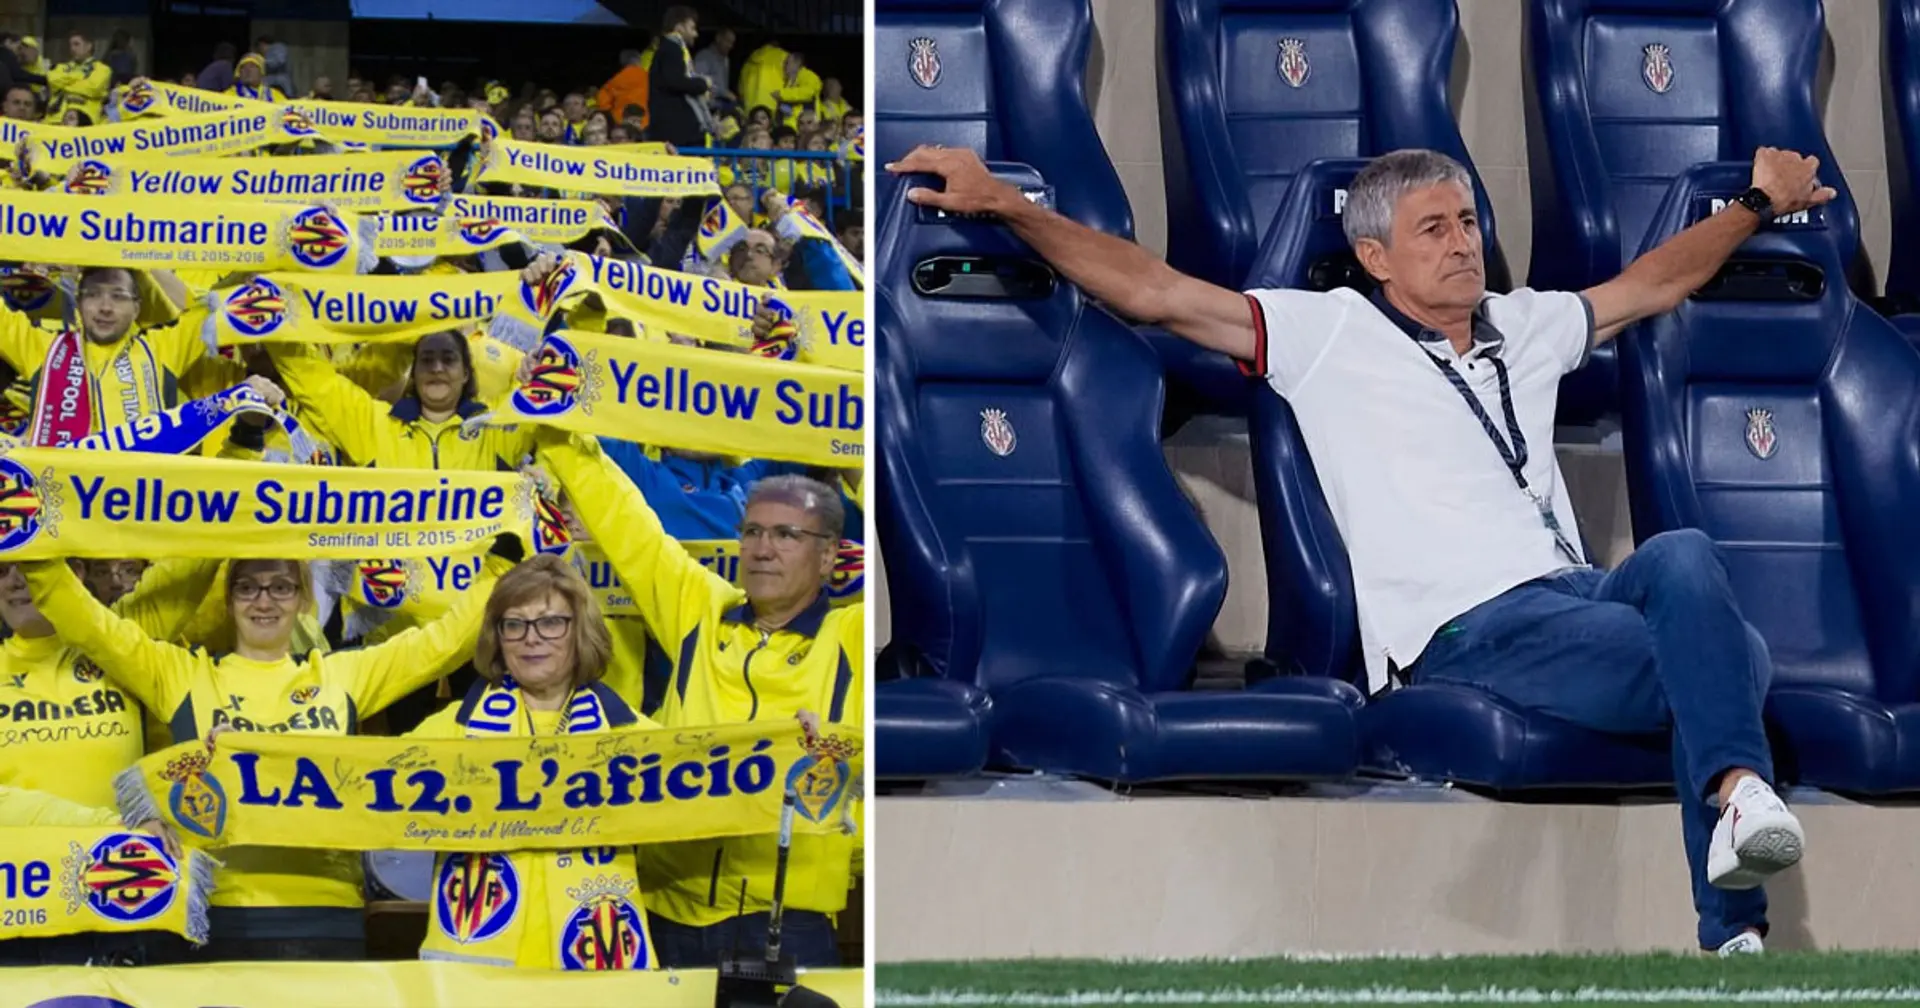 Villarreal fans chant 'Setien out' just 4 matches after ex-Barca coach takes charge